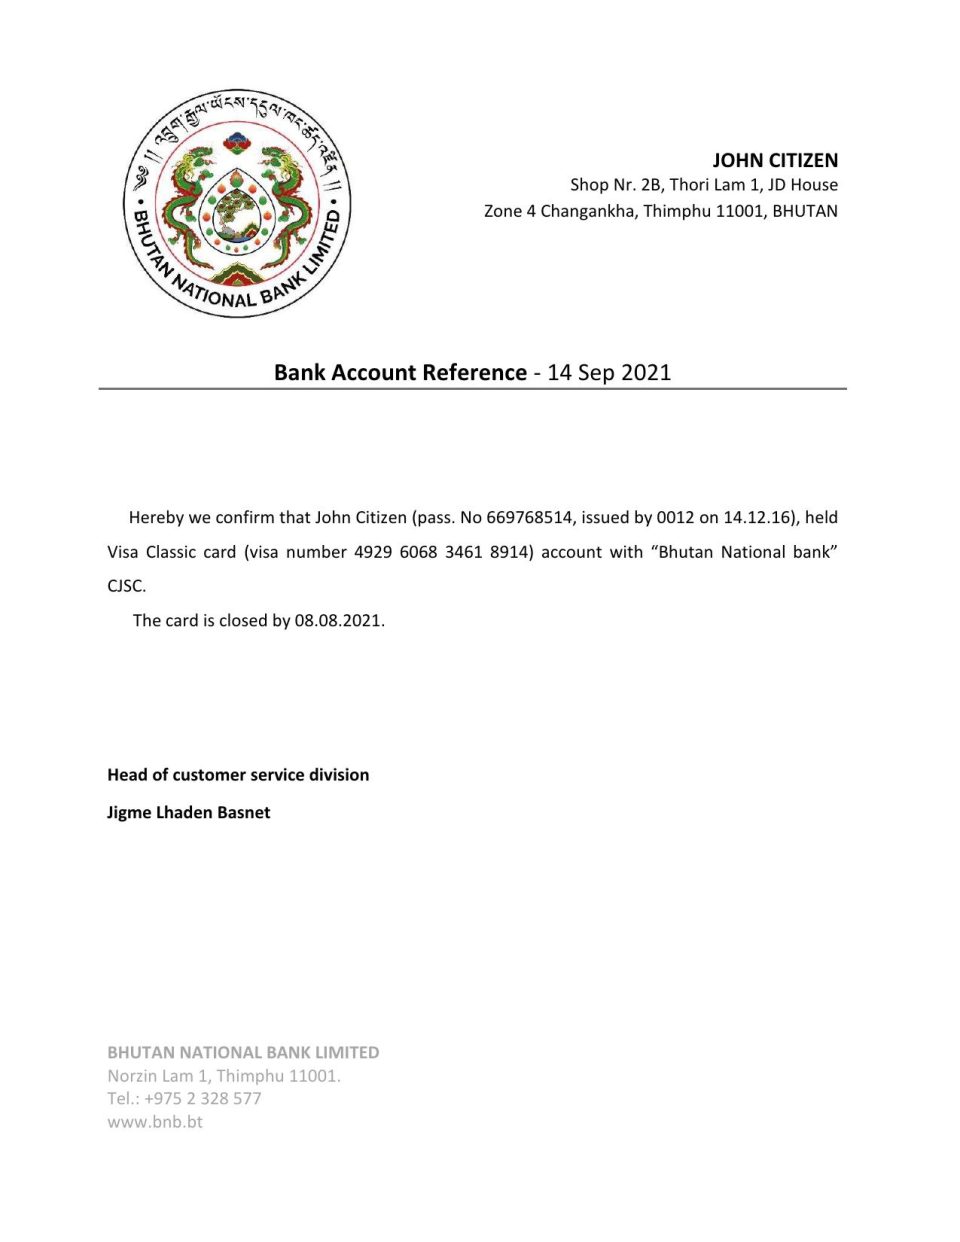 Download Bhutan National Bank Reference Letter Templates | Editable Word